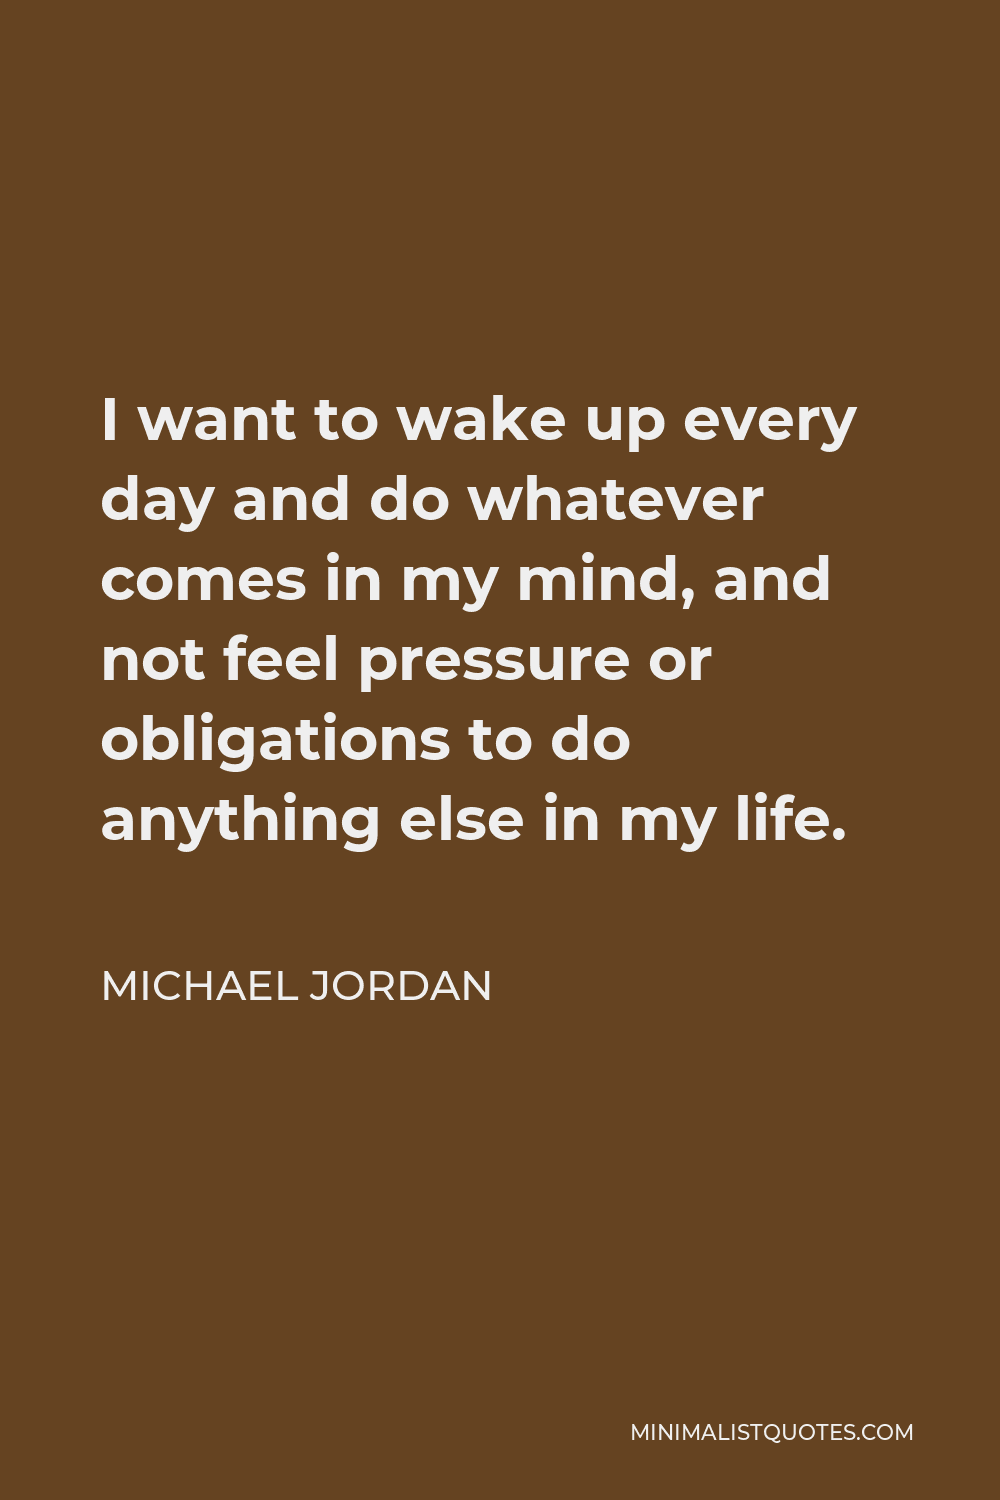 Michael Jordan Quote - I want to wake up every day and do whatever comes in my mind, and not feel pressure or obligations to do anything else in my life.